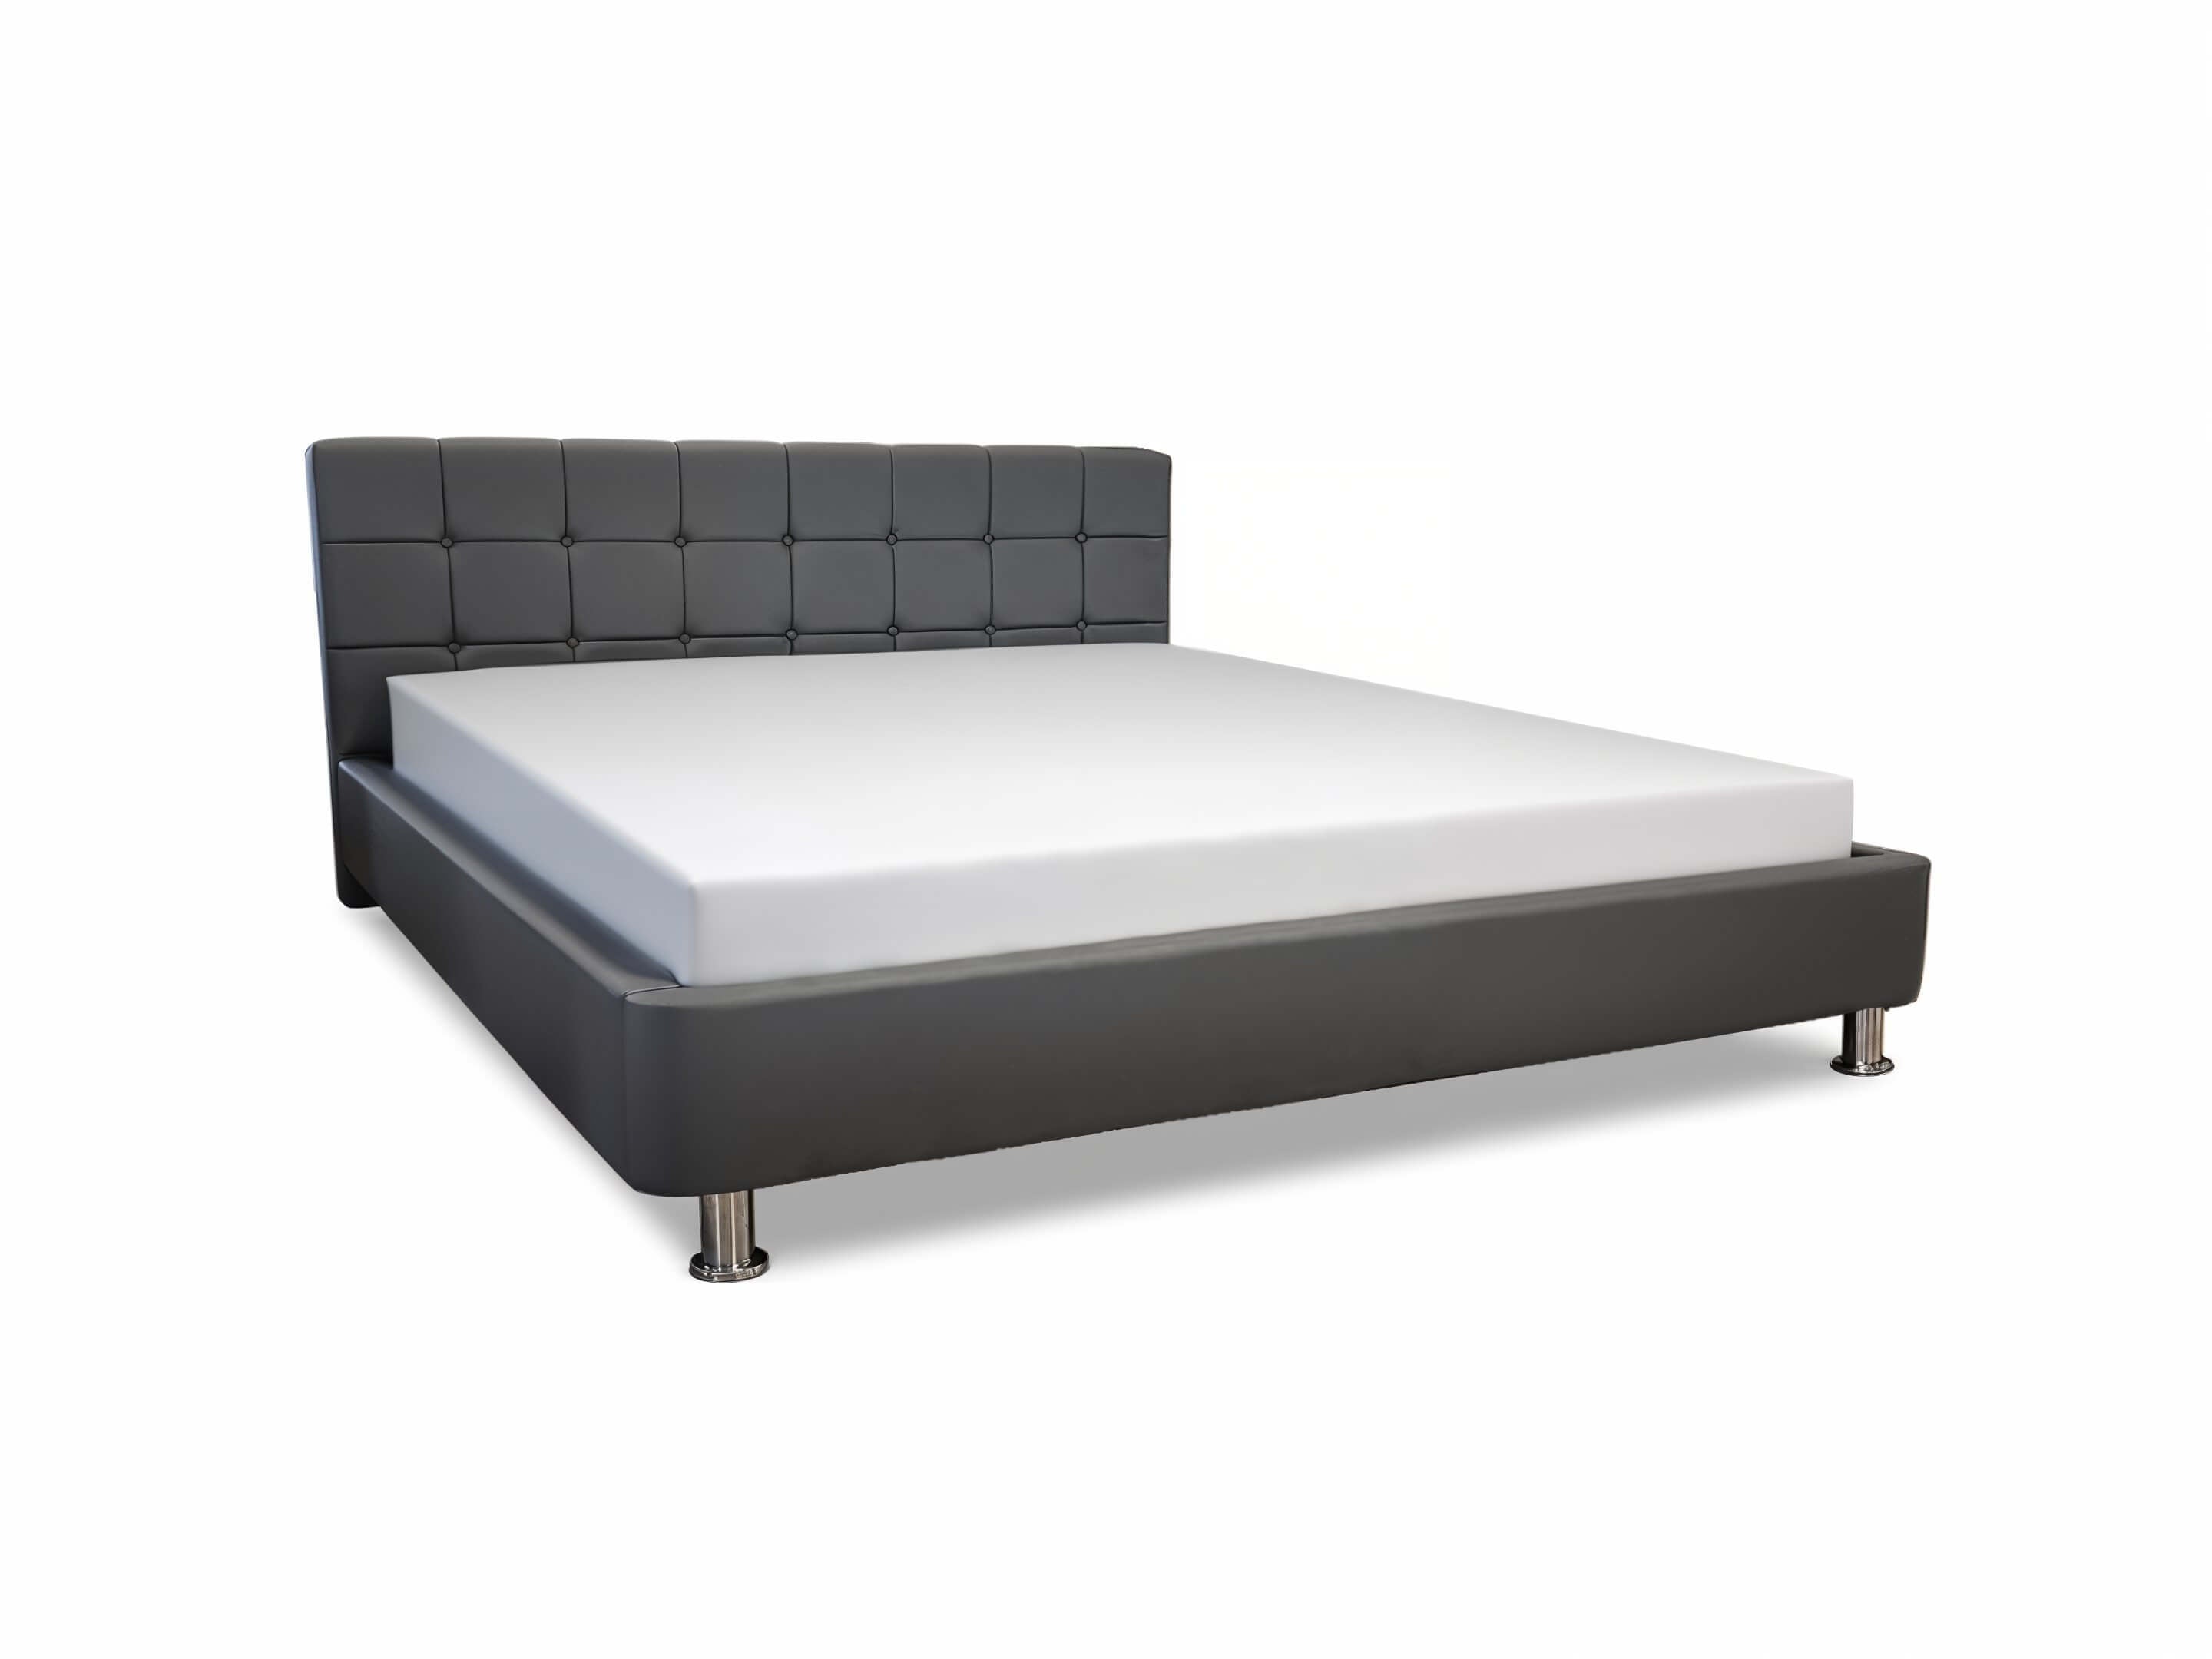 DARK GREY BONDED LEATHER BED WITH STAINLESS STEEL FEET - Lux Furniture